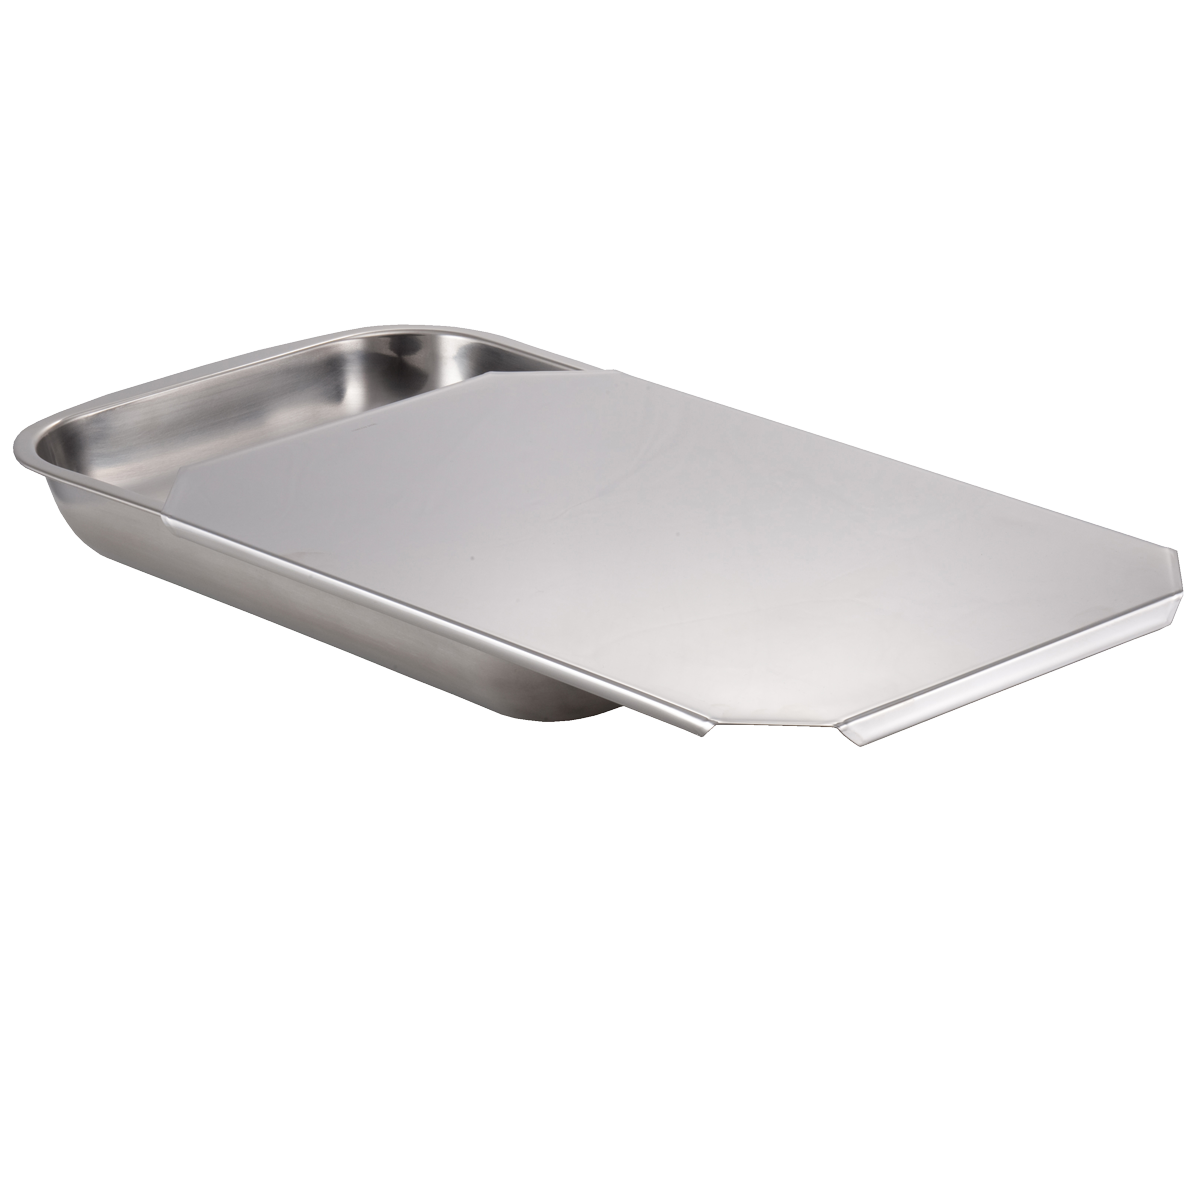 Vintage 9 X 13 Aluminum Baking Pan W LID, Covered Cake Pan, Lasagna Pan  With Top, Secure Slide on Lid, Farmhouse Kitchen,craft Storage As-is 